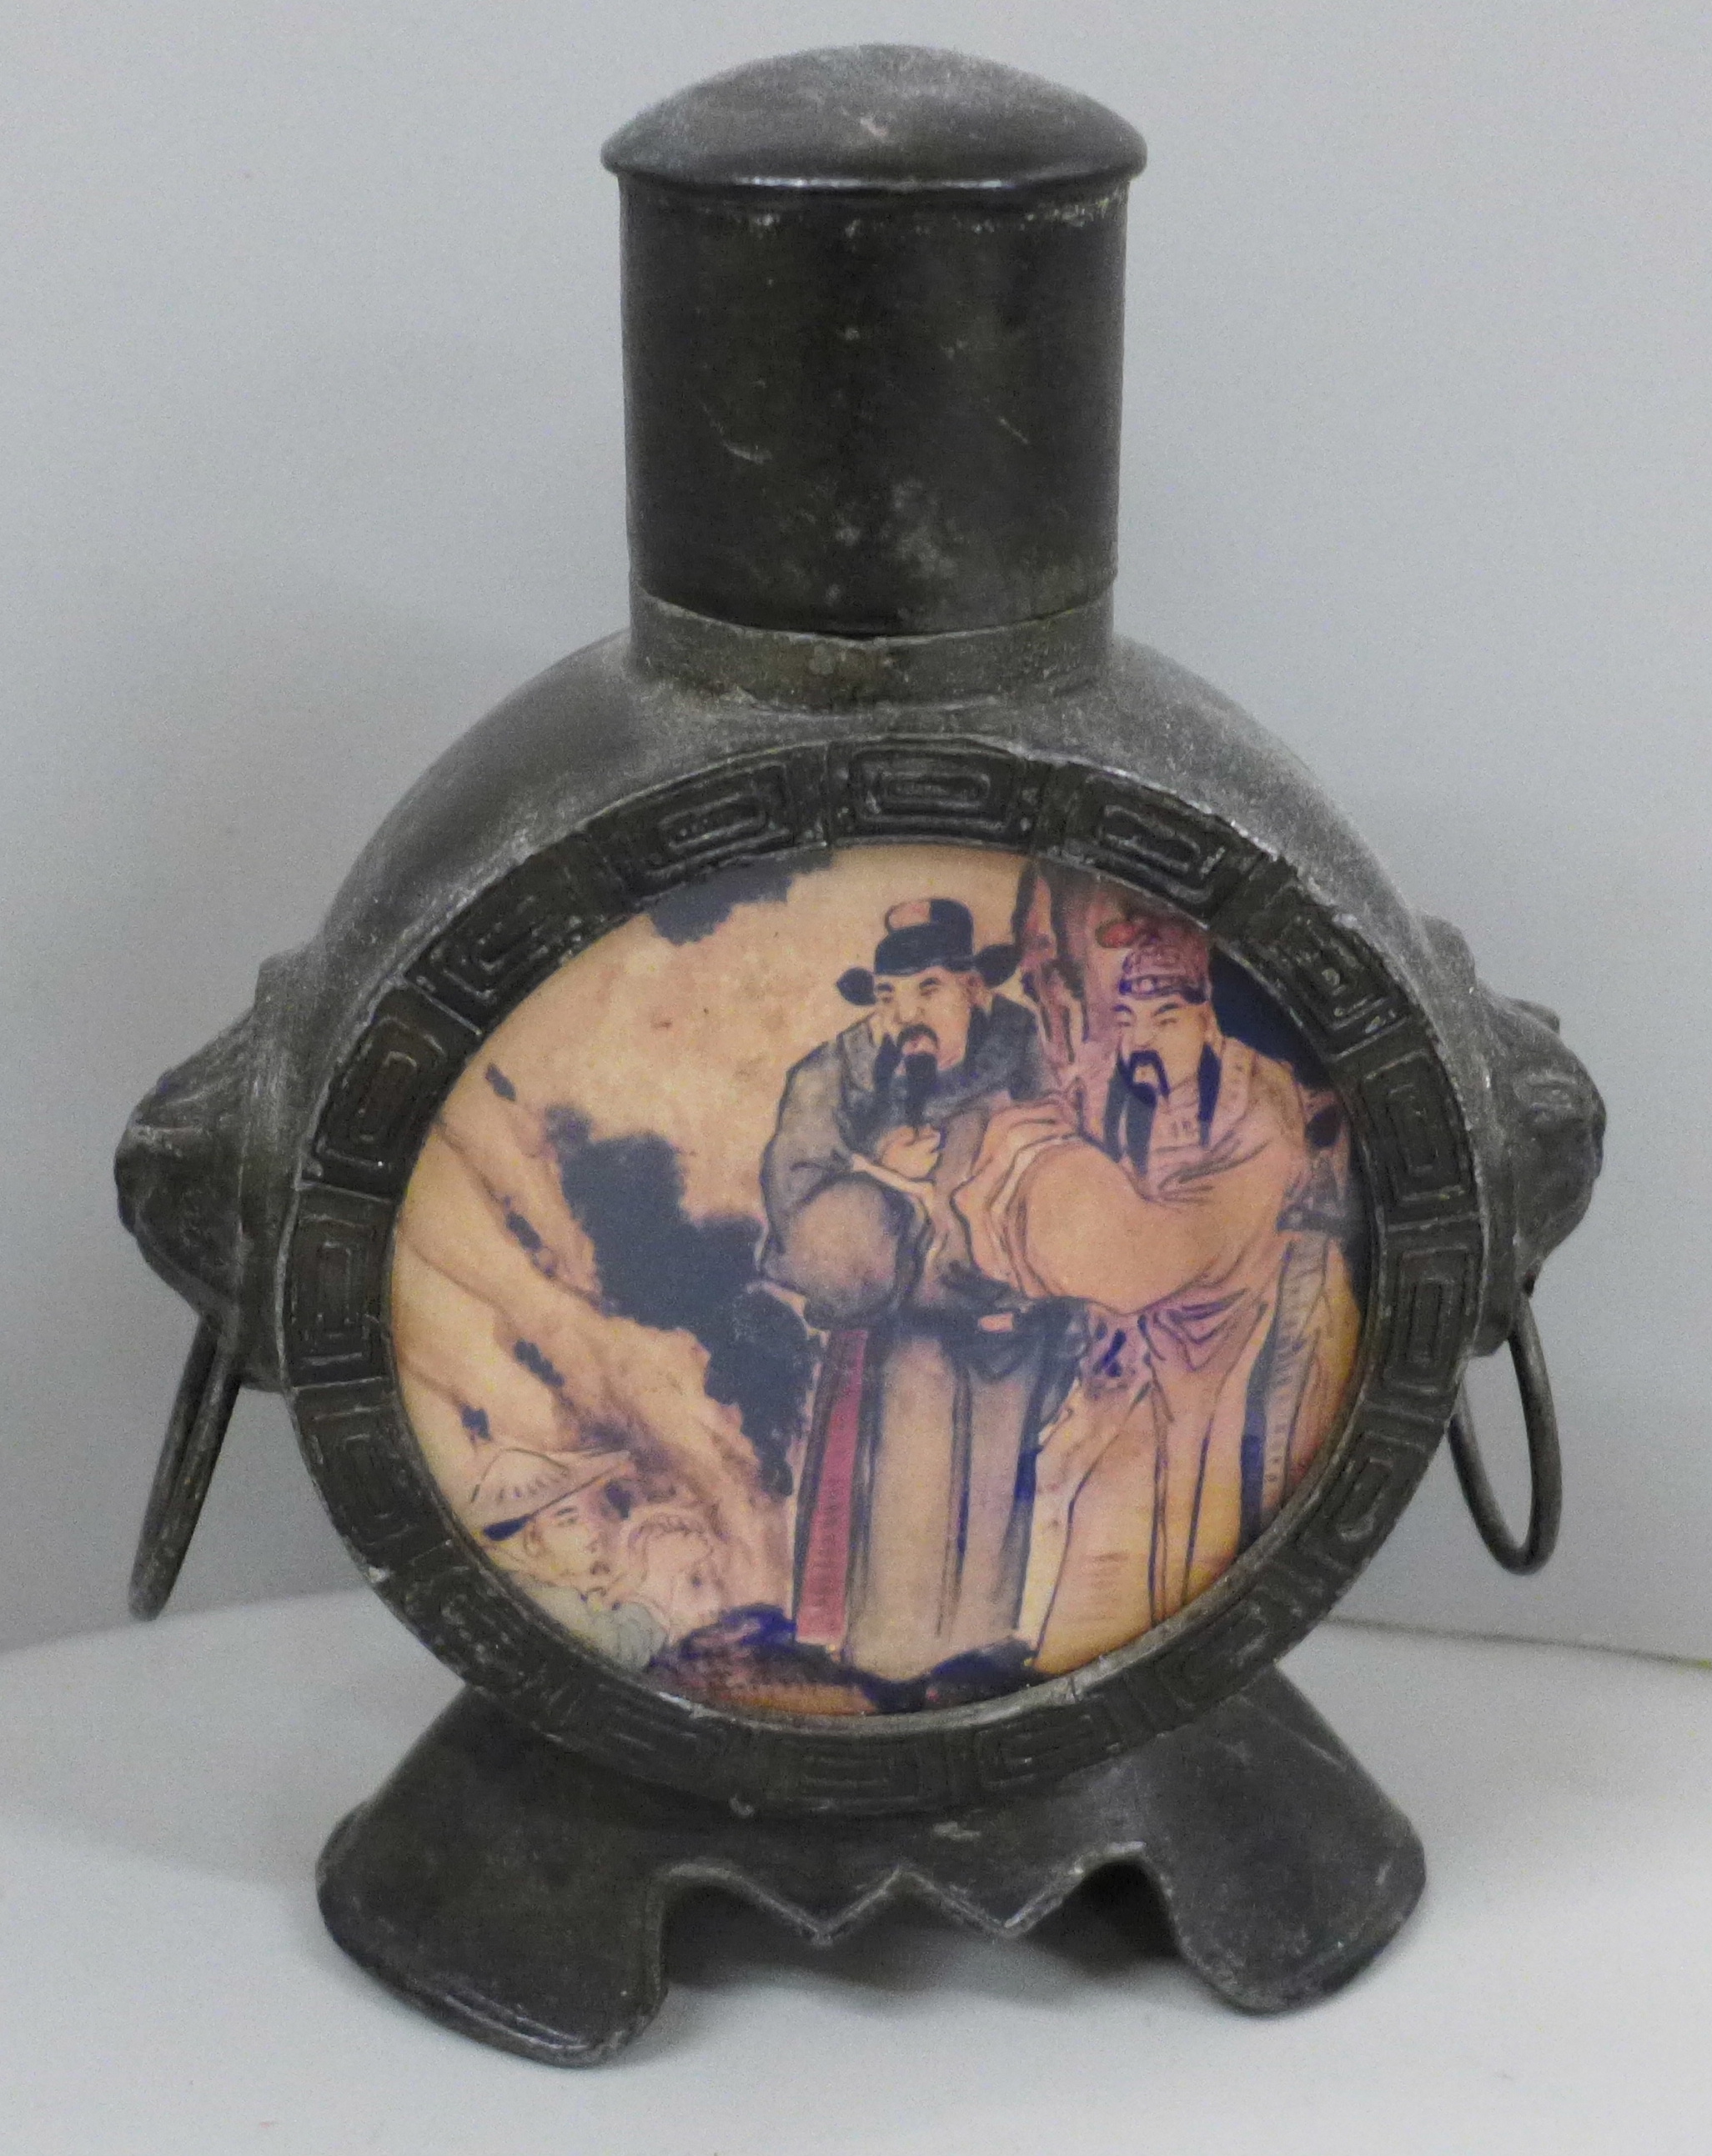 A Chinese Qing Dynasty style pewter moon flask - Image 2 of 4